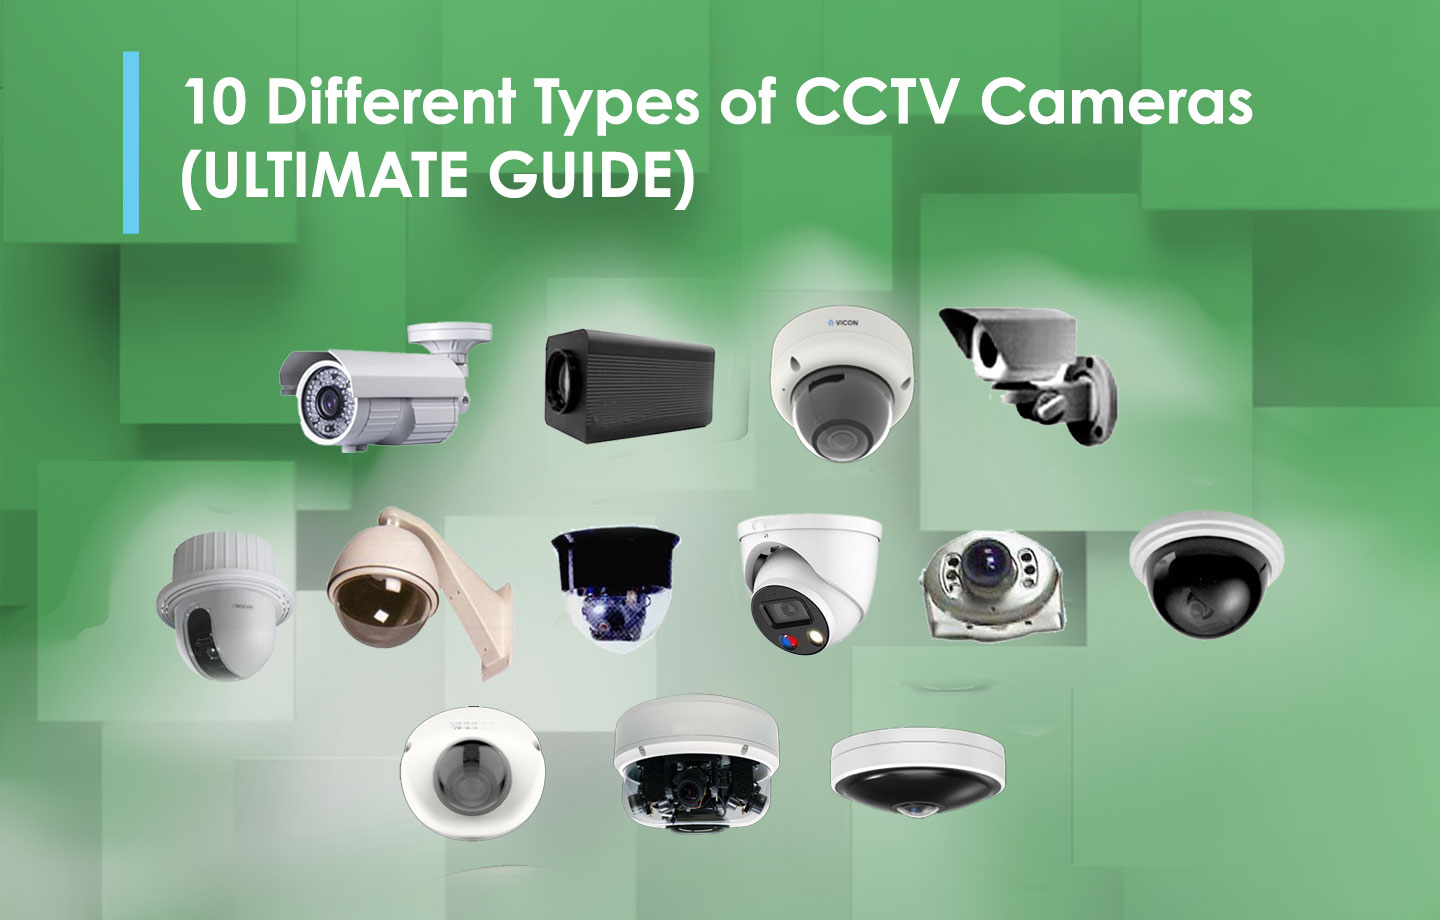 10 Different Types of CCTV Cameras